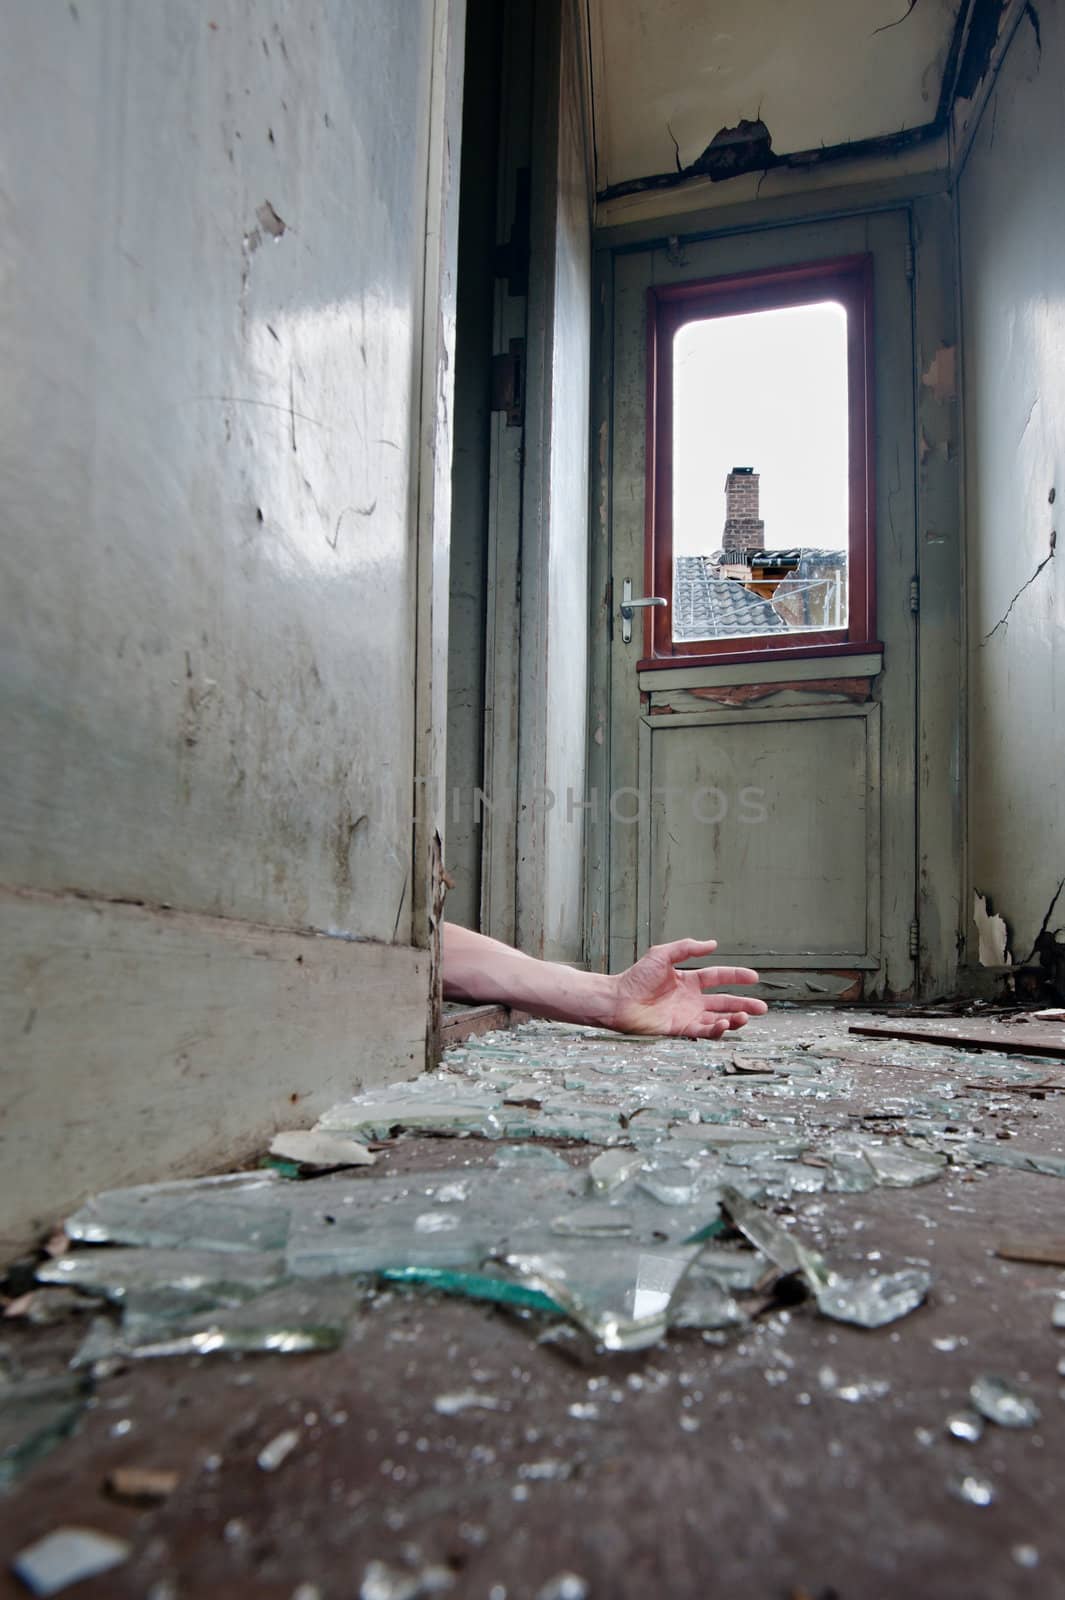 A person lying on the floor inn an old worn-out railway carriage with broken glass on the floor